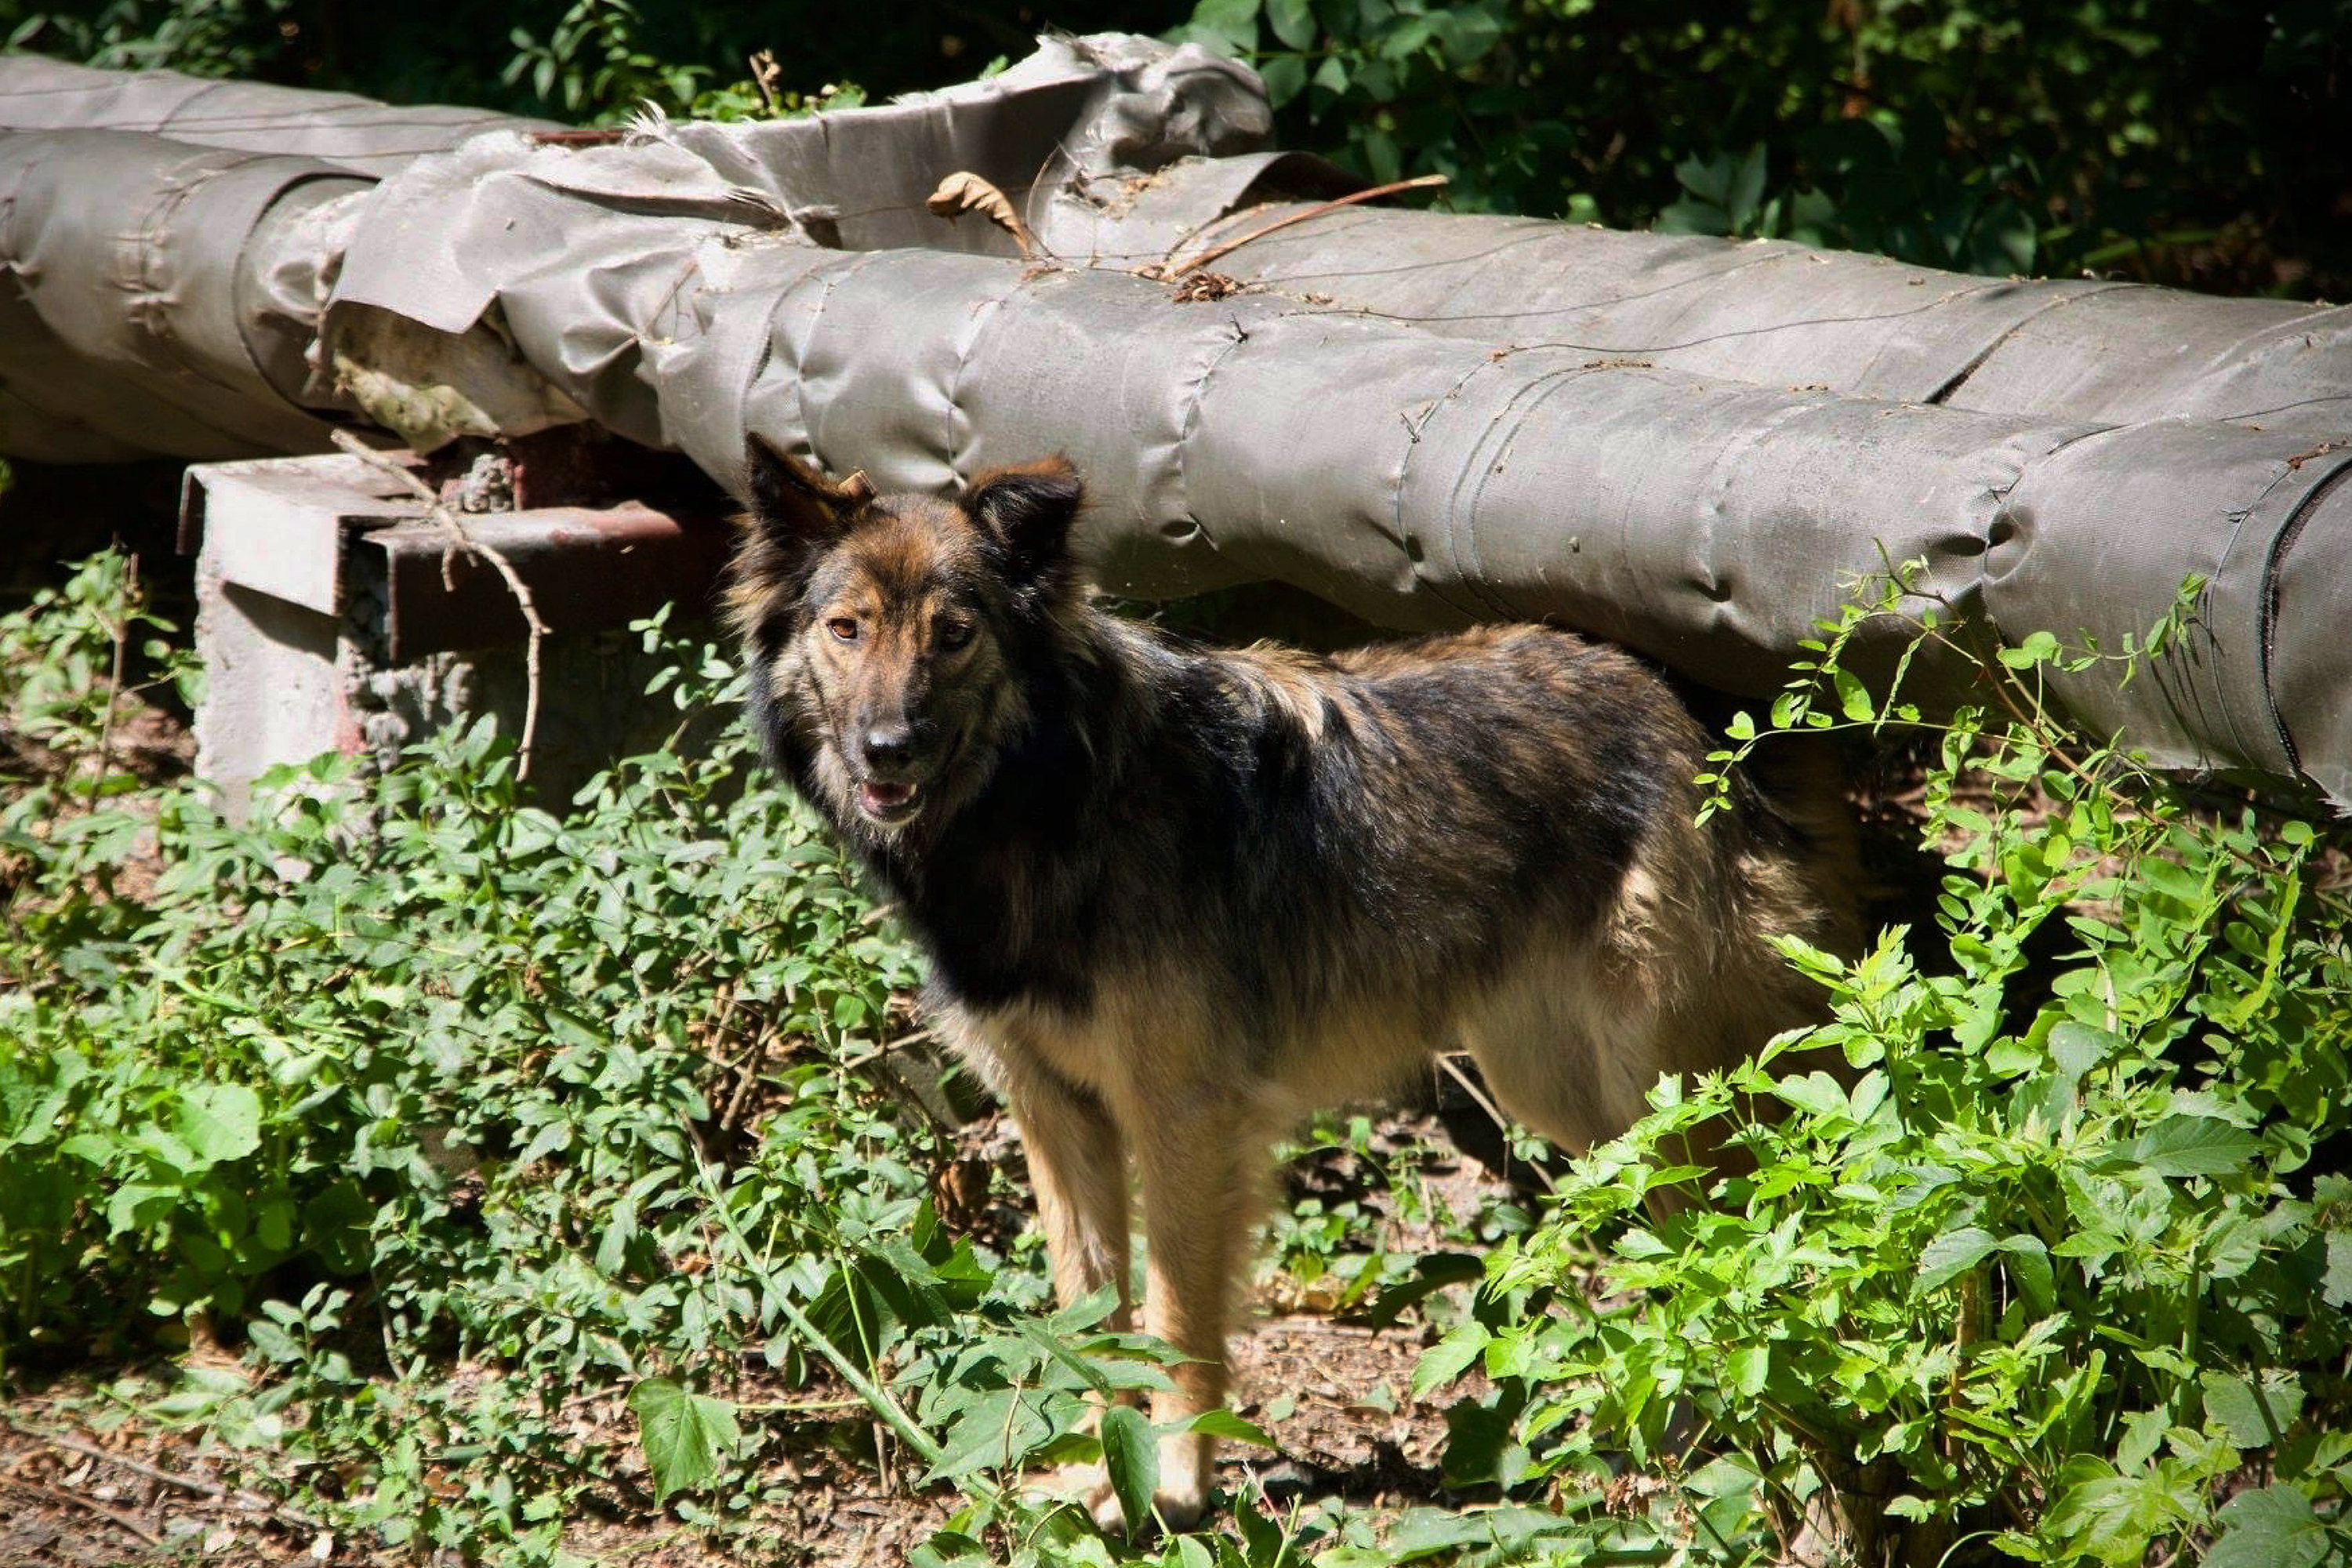 Can the dogs of Chernobyl teach us new ways to survive?-1